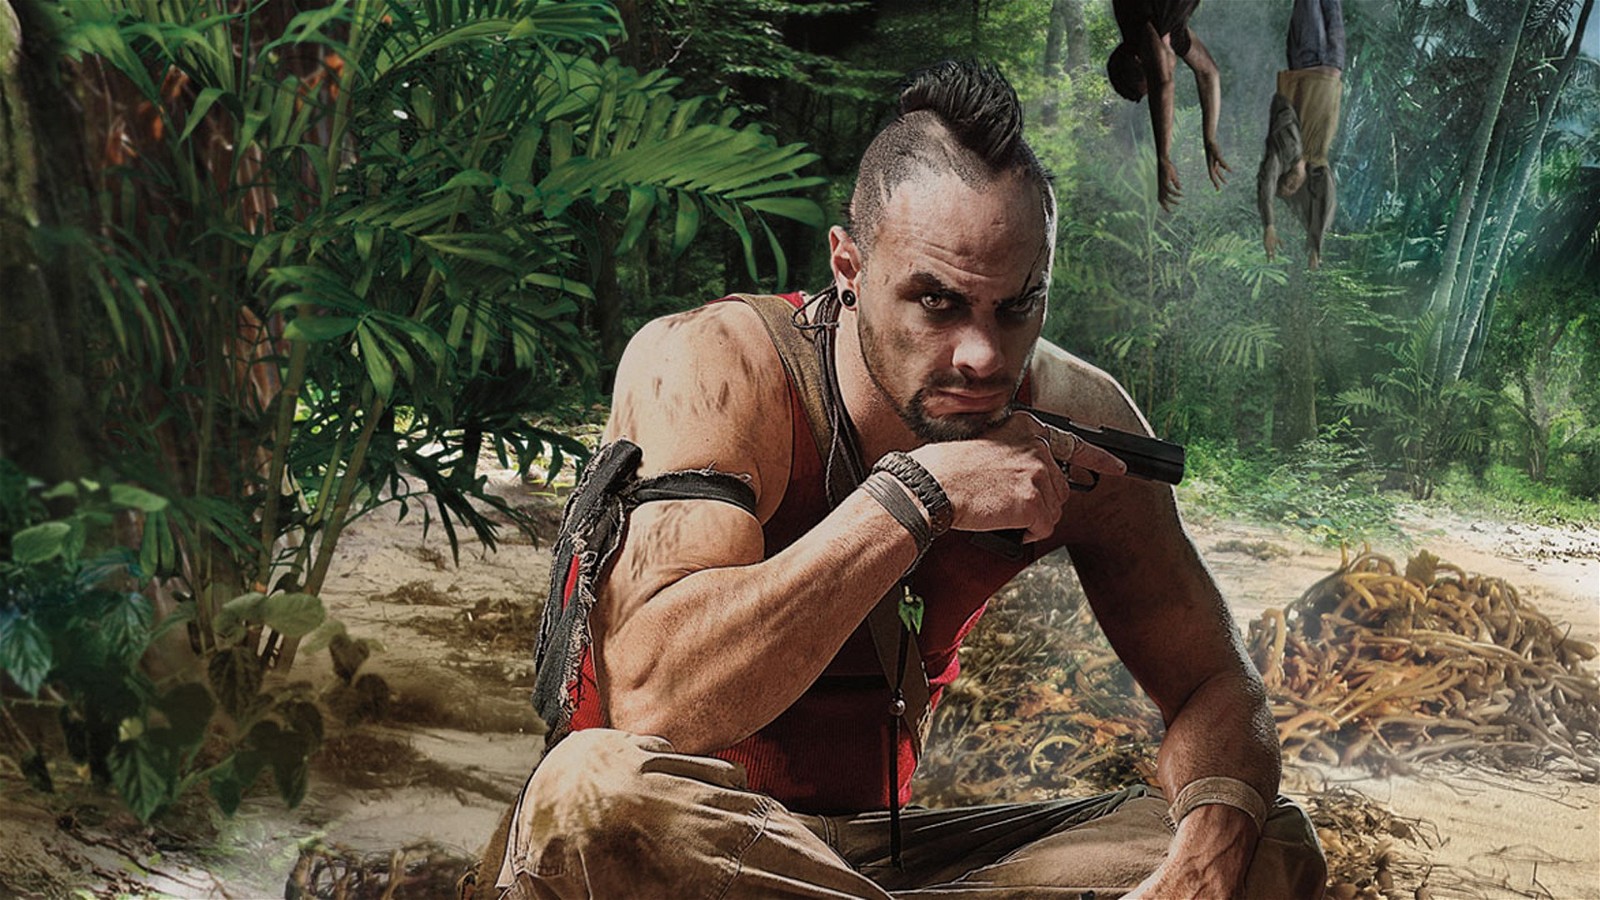 More than the time limit mechanic, Far Cry 7 needs a compelling villain like Vaas. Image credit: Ubisoft